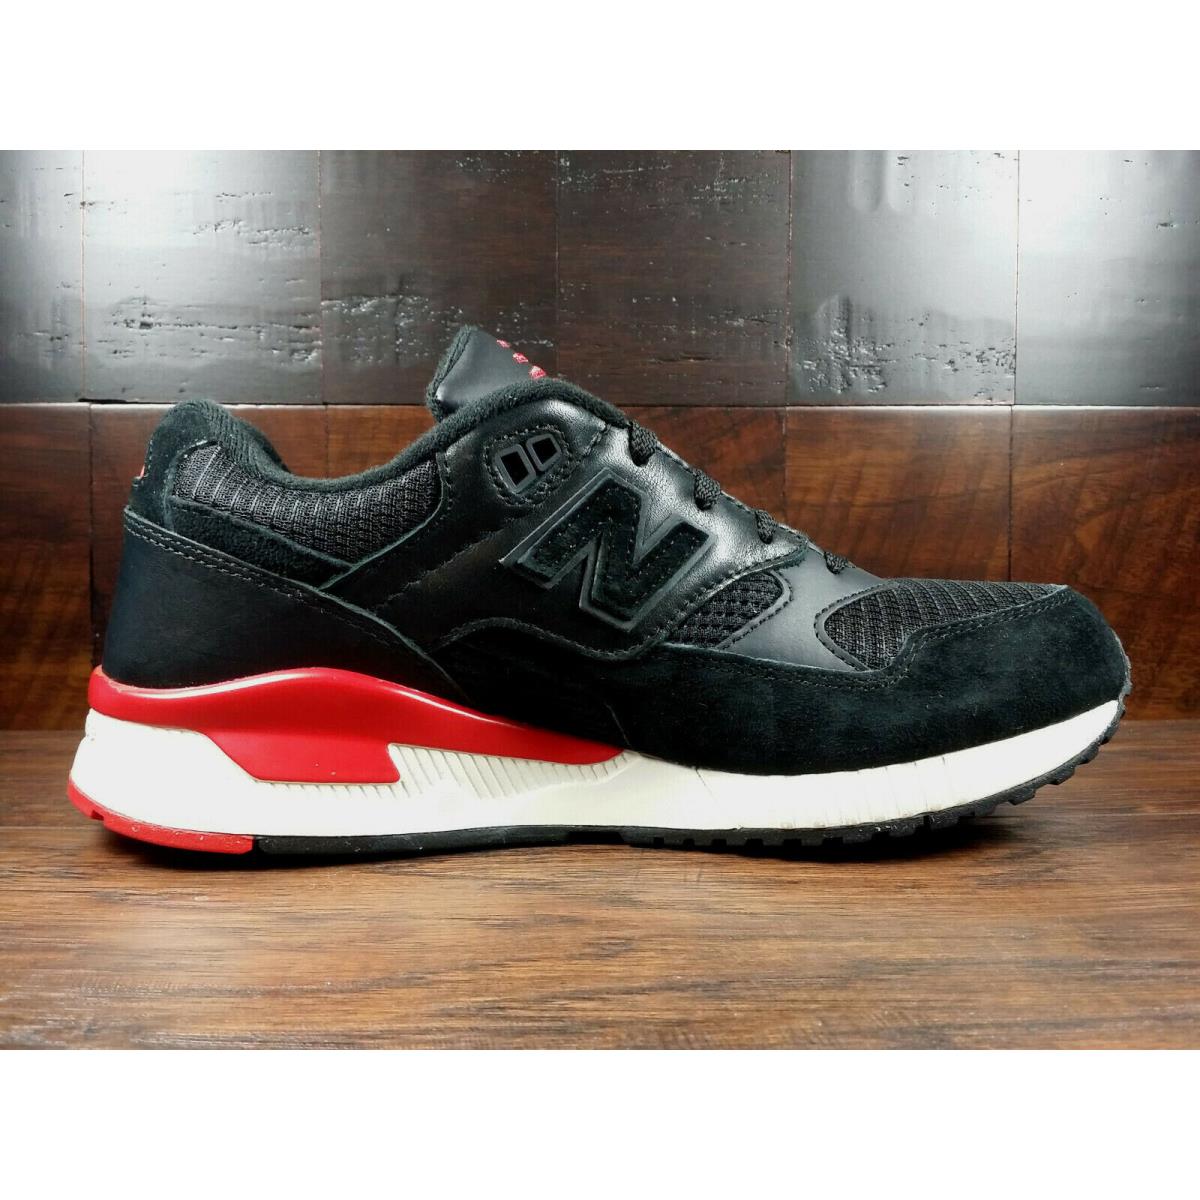 New Balance shoes  - Black / Red 0